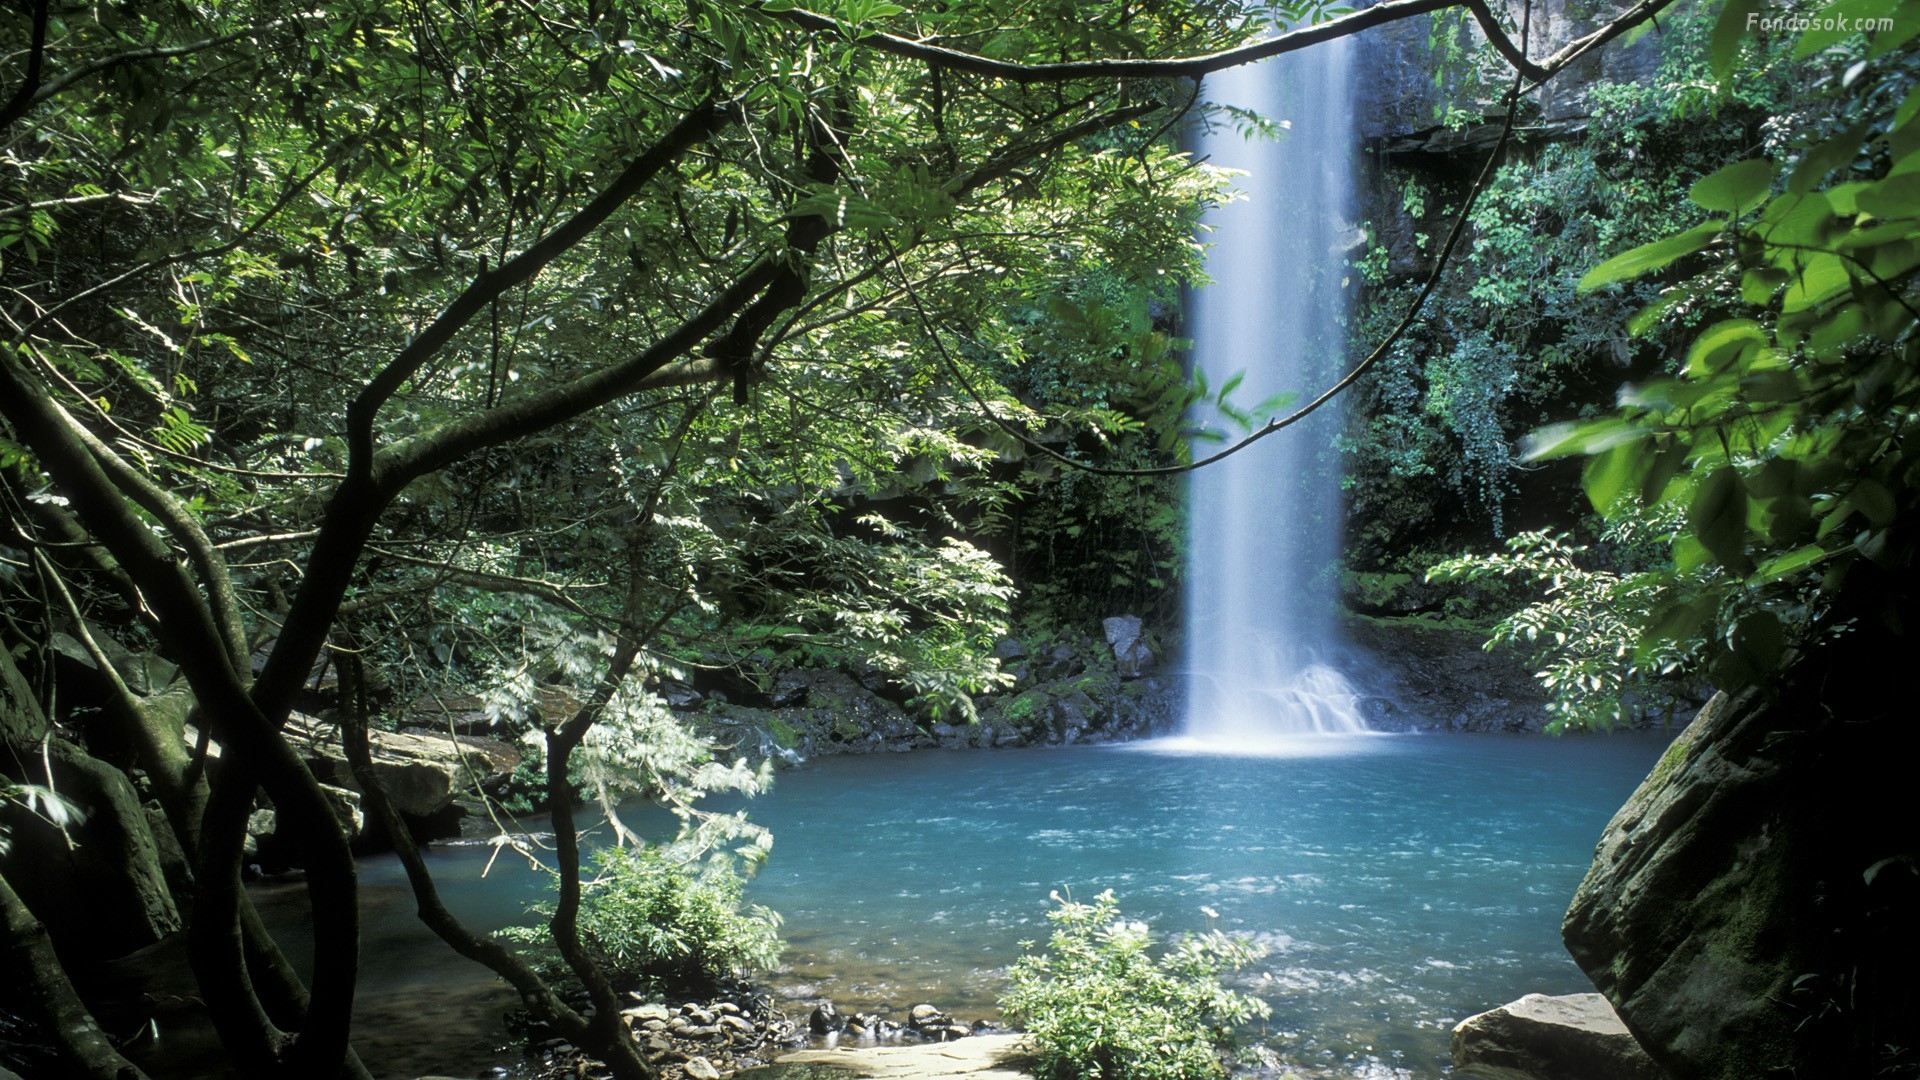 Wallpaper Nature Waterfall Forest Jungle Landscape Costa Rica images  for desktop section природа  download